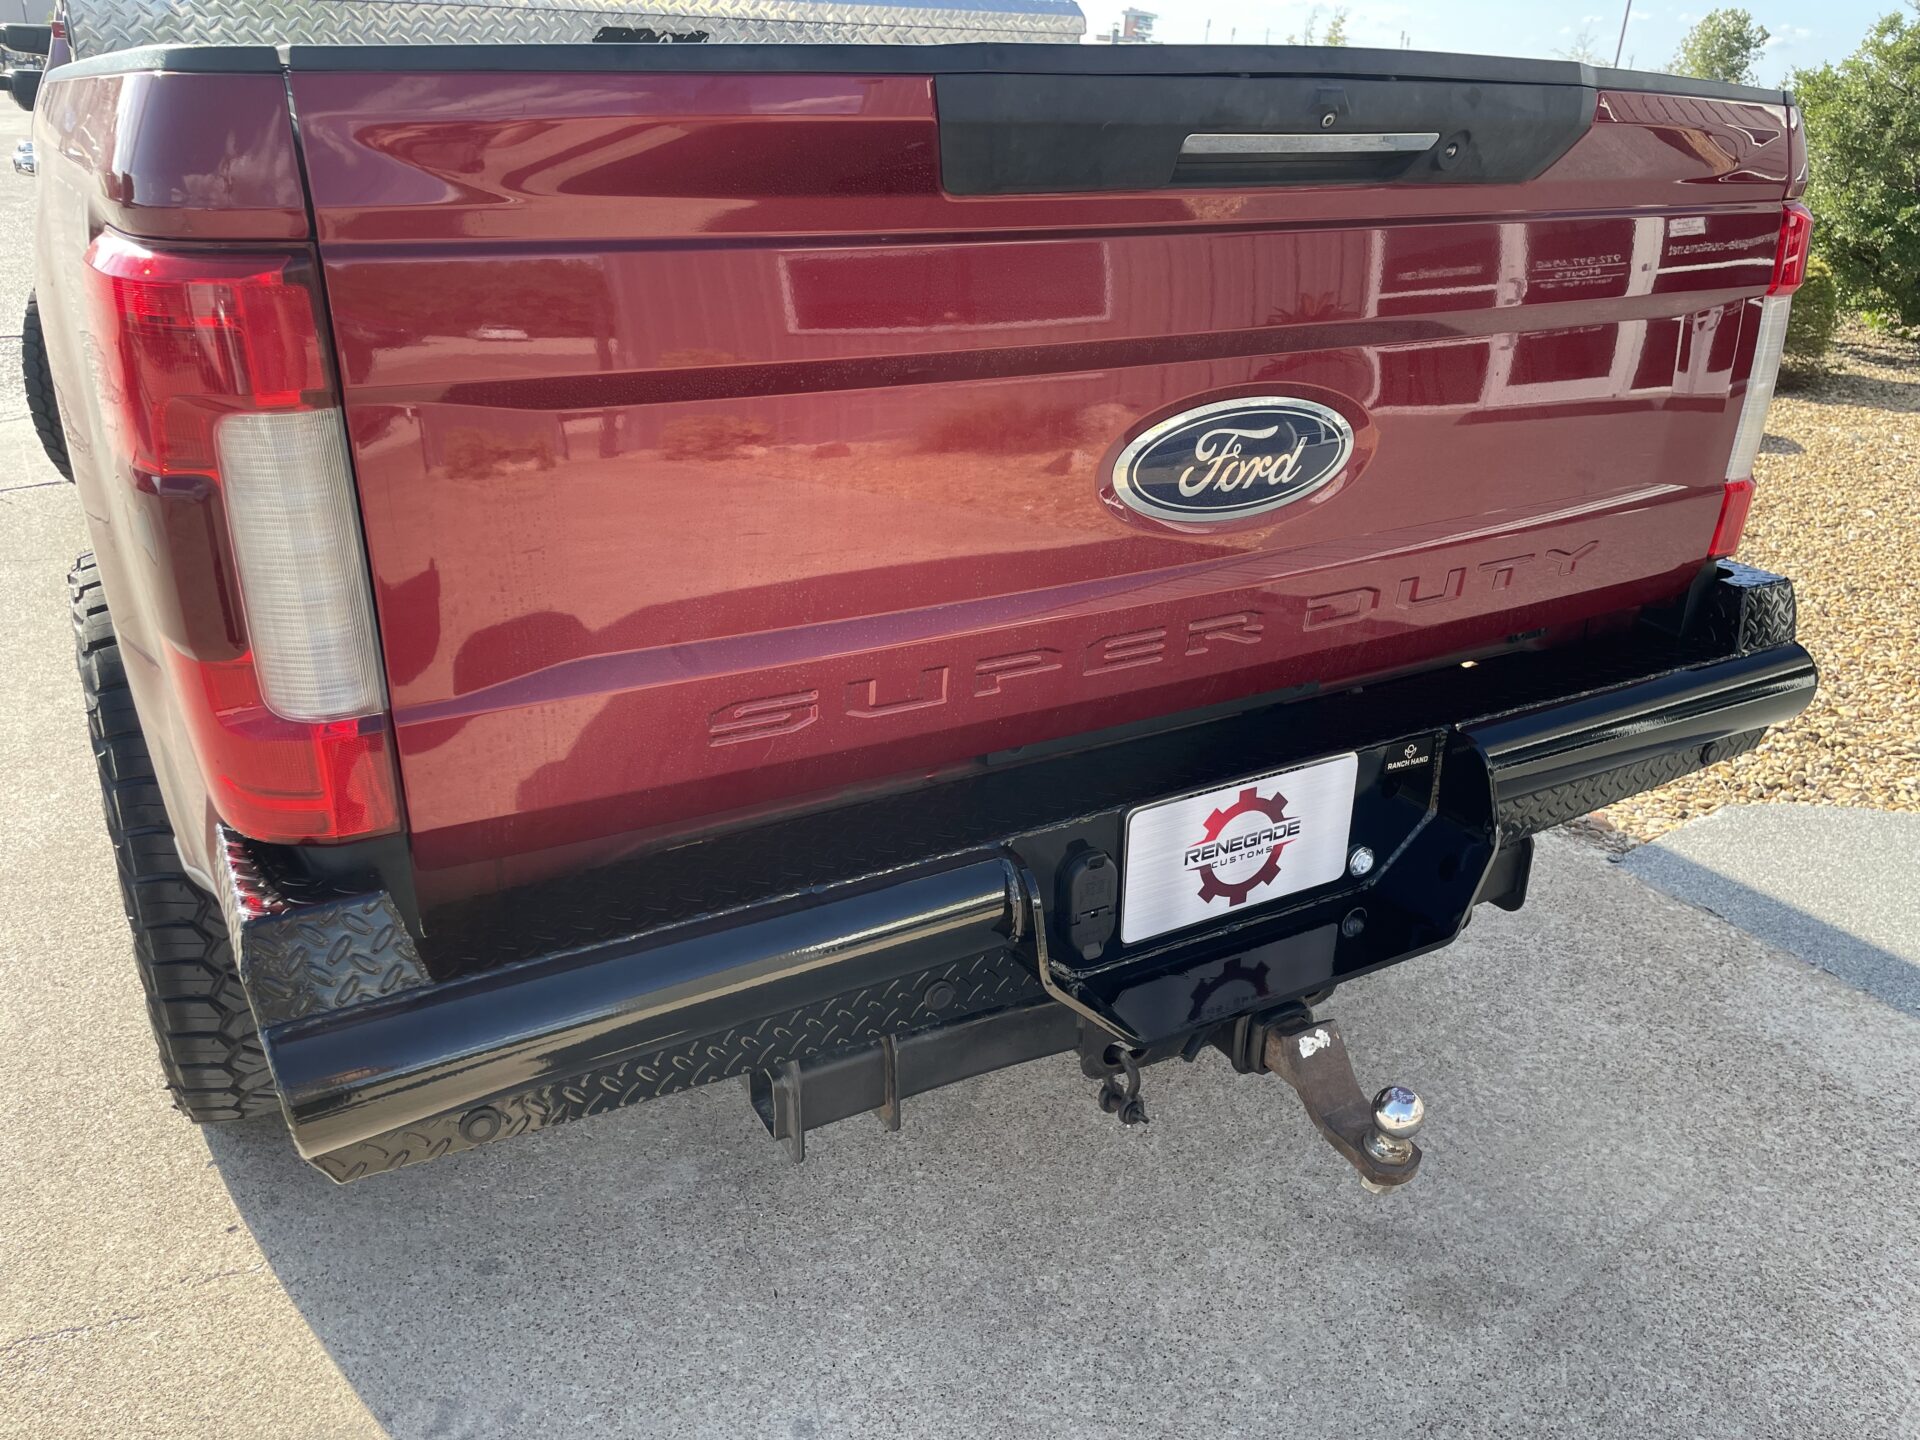 2018 Ford F350_Ranch Hand Legend Series Bumpers_Renegade Customs 3